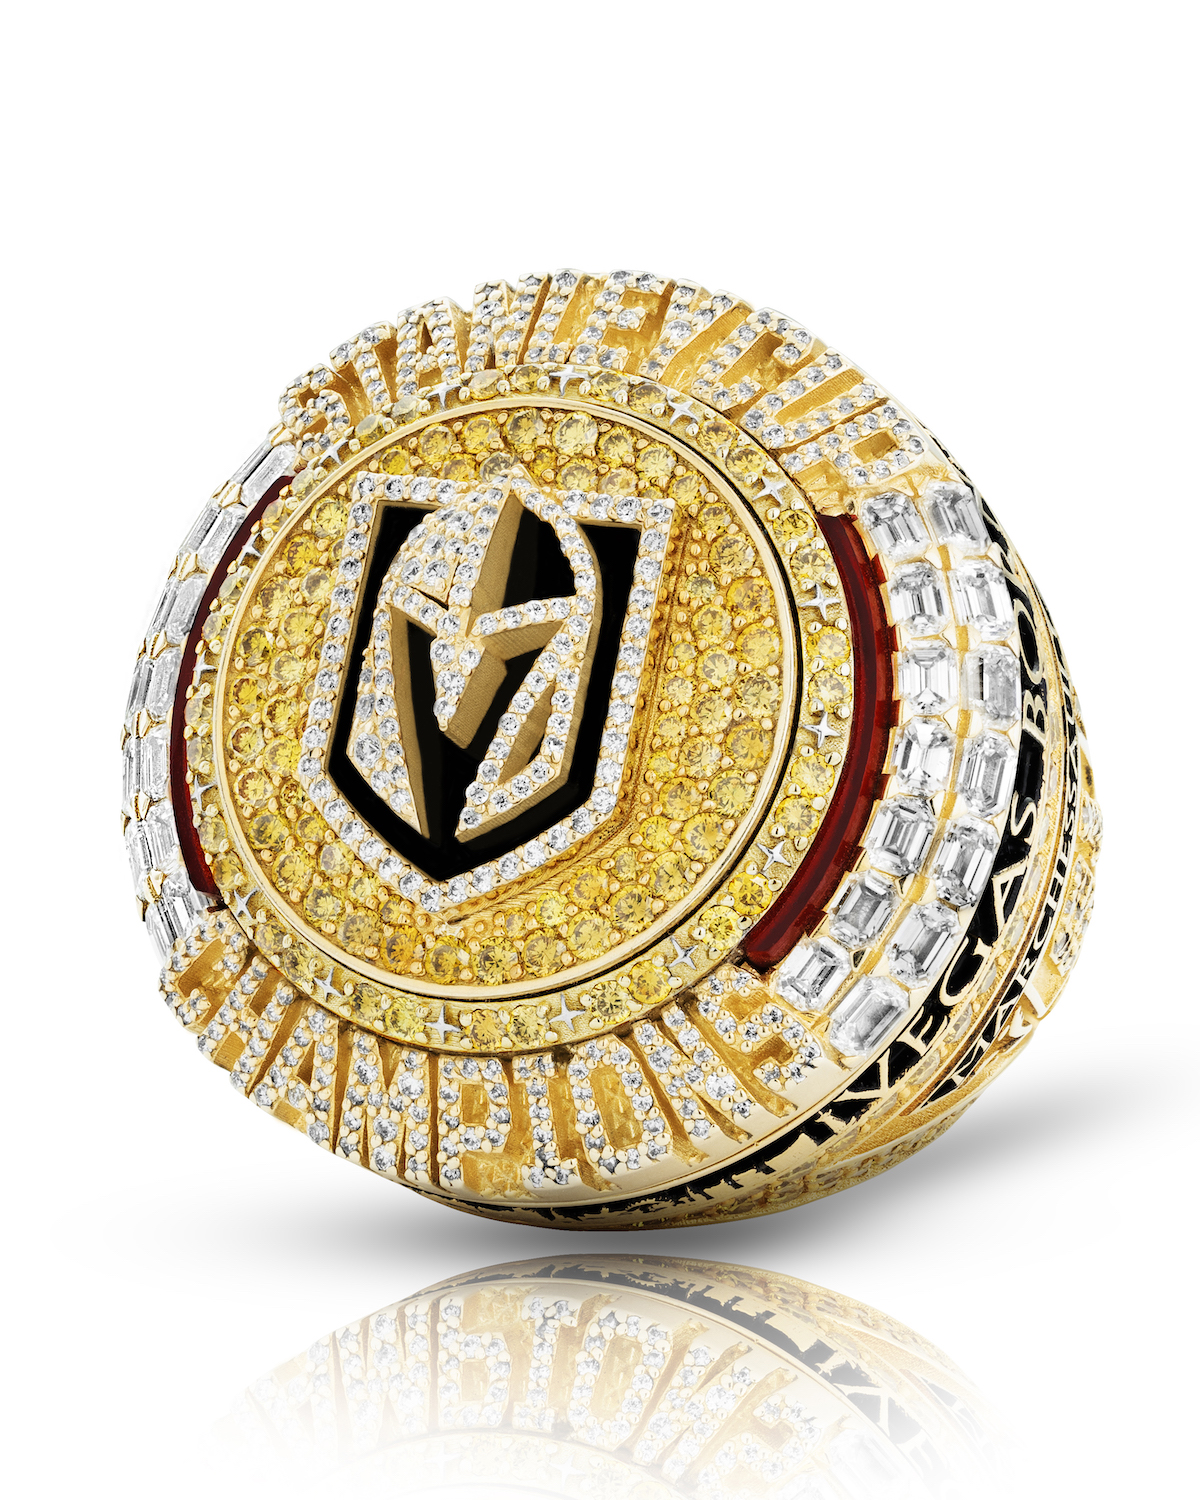 The Stanley Cup Champions Vegas Golden Knights All Team And Fans